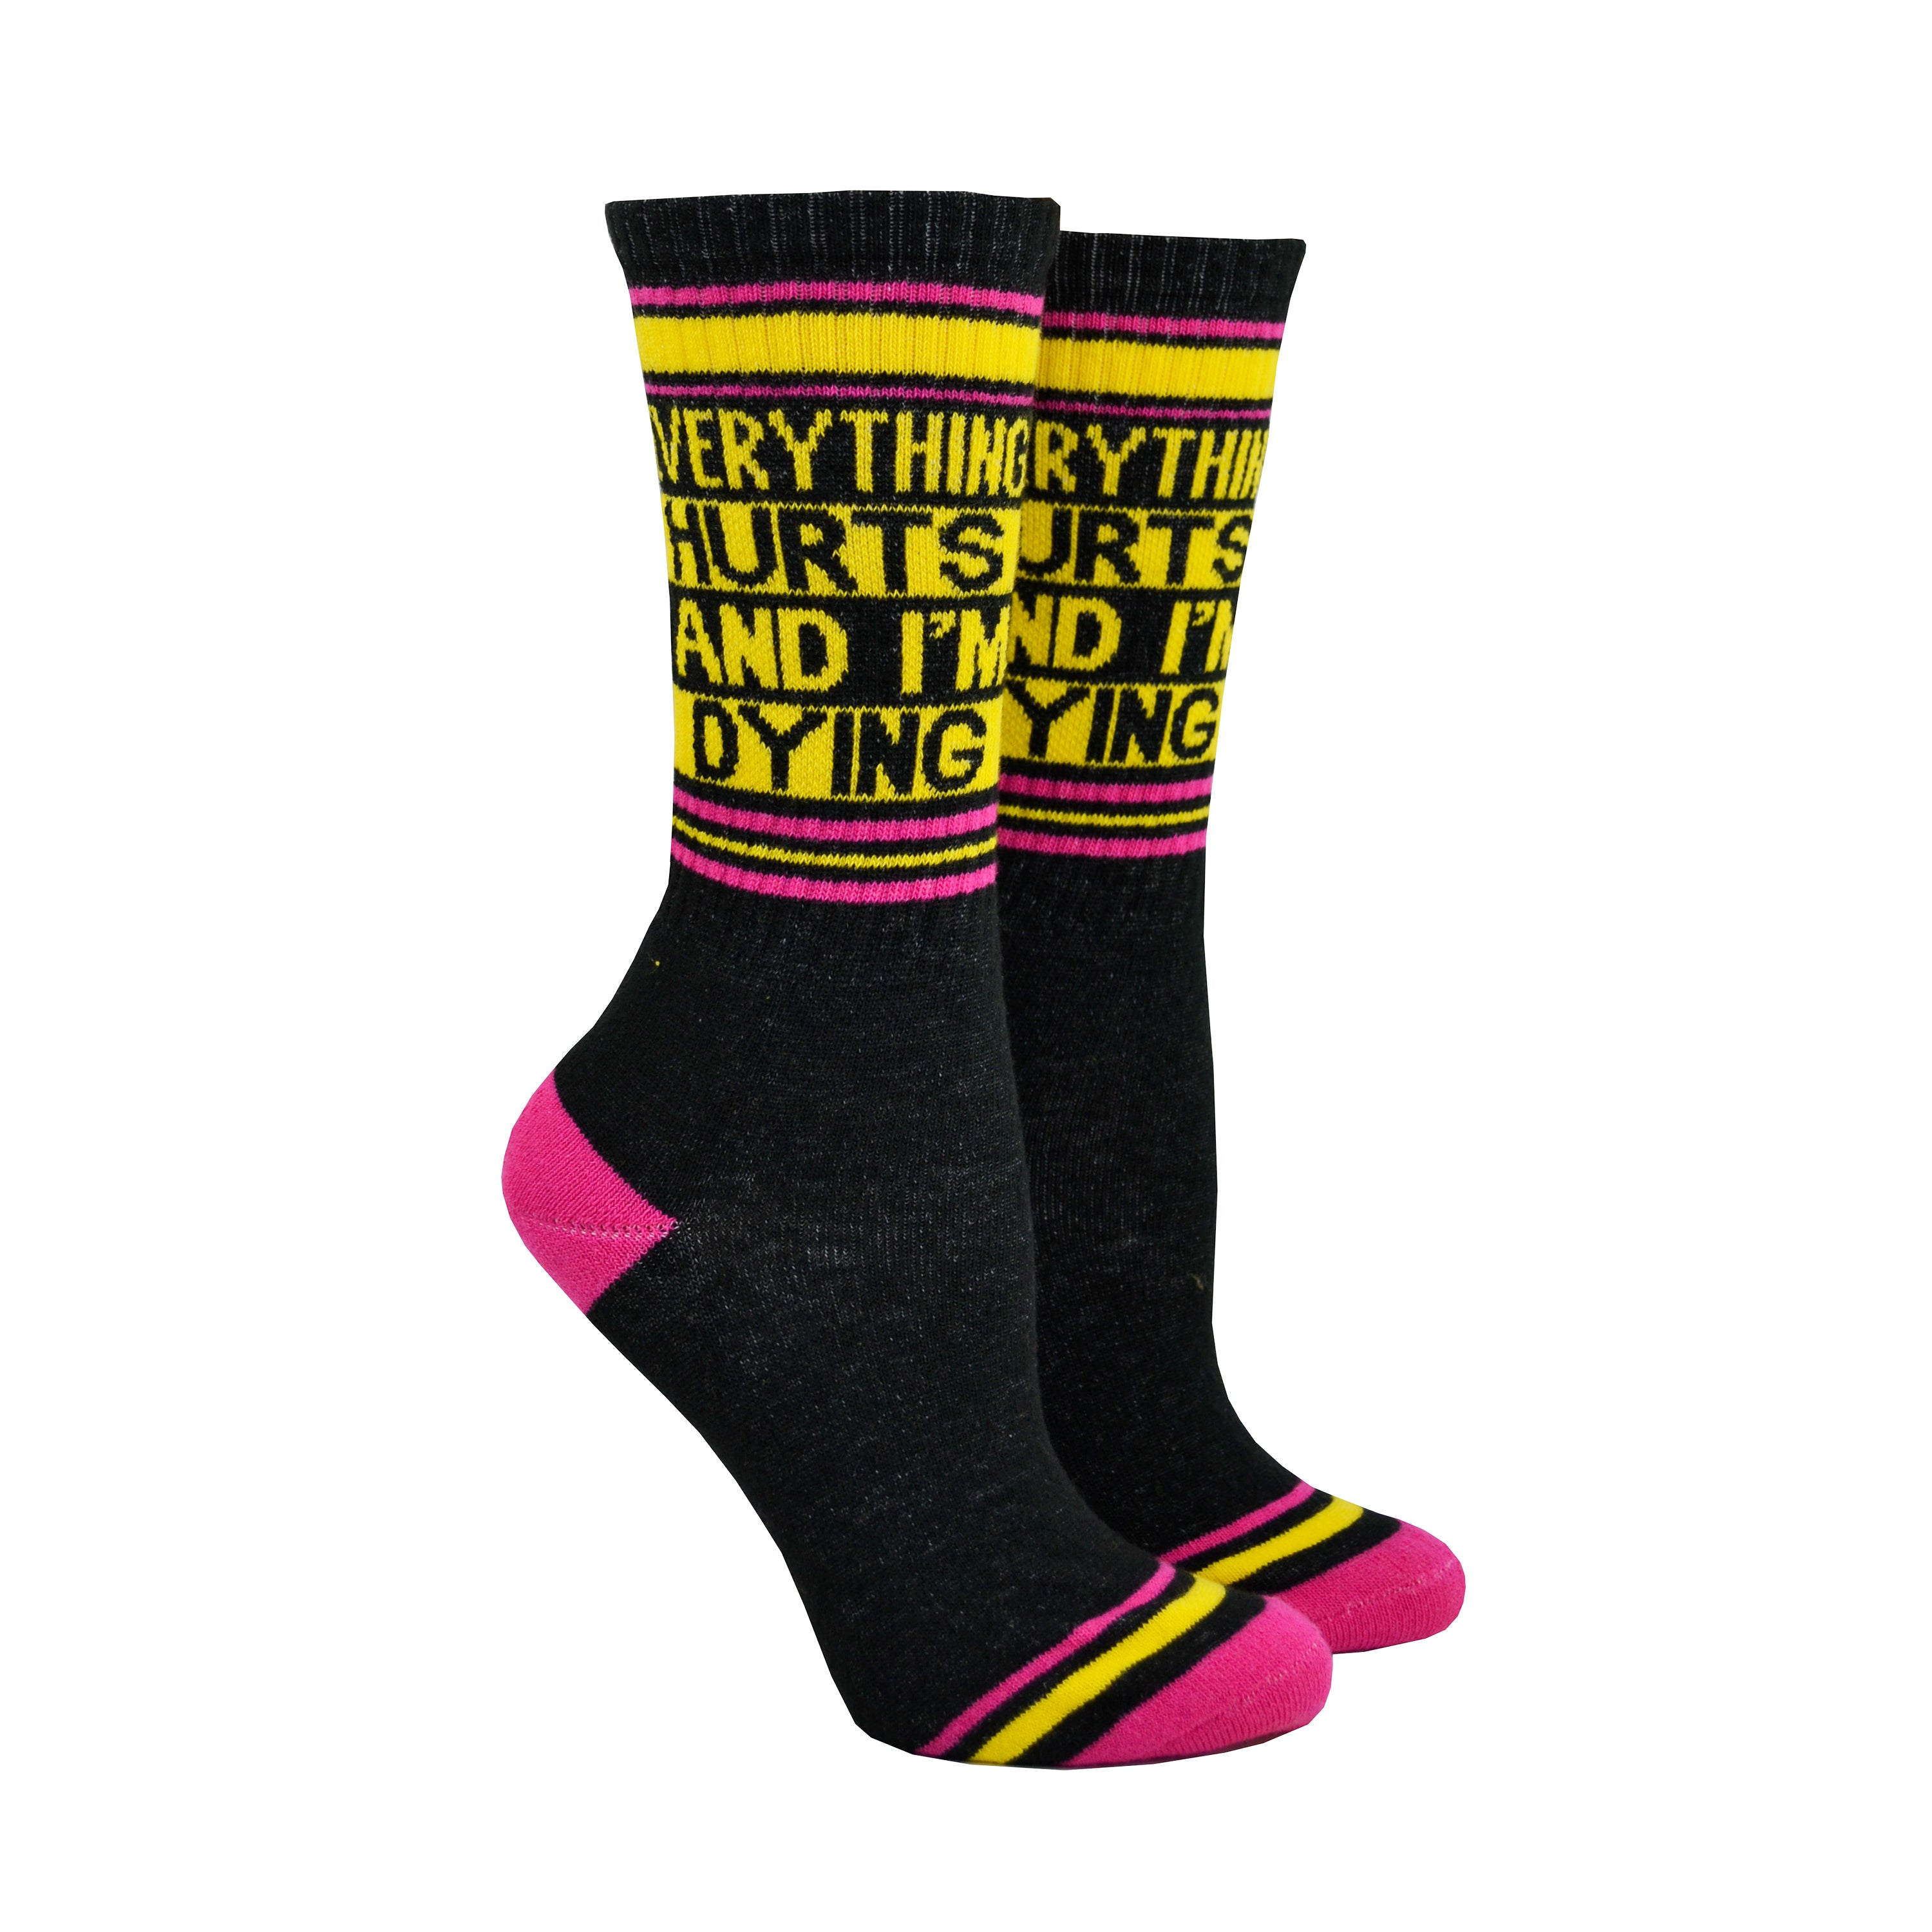 Shown on a foot mold, a pair of Gumball Poodle black cotton crew socks with pink toe/heel and yellow “Everything Hurts and I’m Dying” text